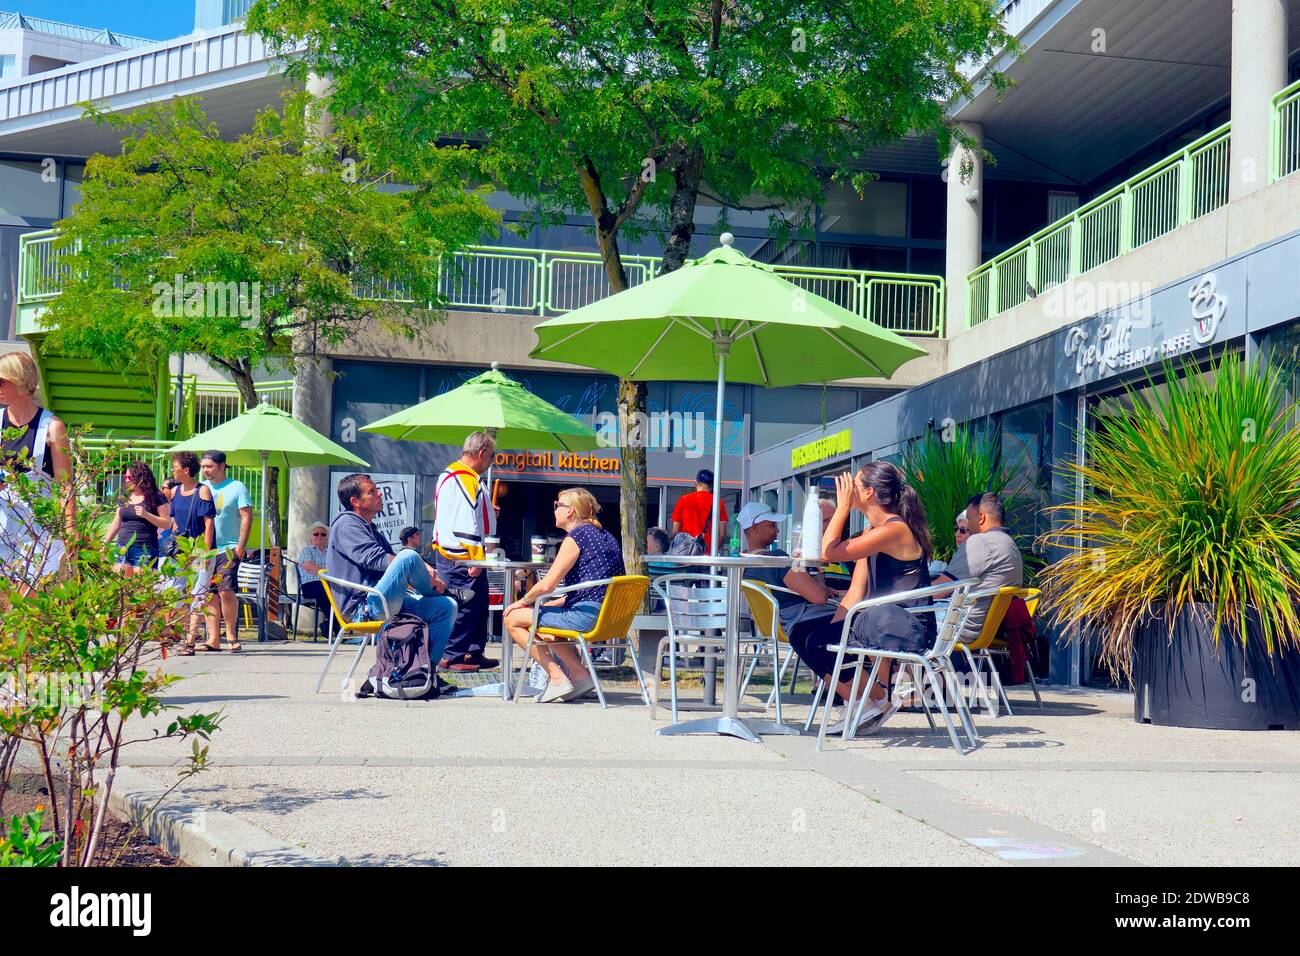 People sitting at an outdoor cafe under green umbrellas during the summer.  Stock photo. Stock Photo